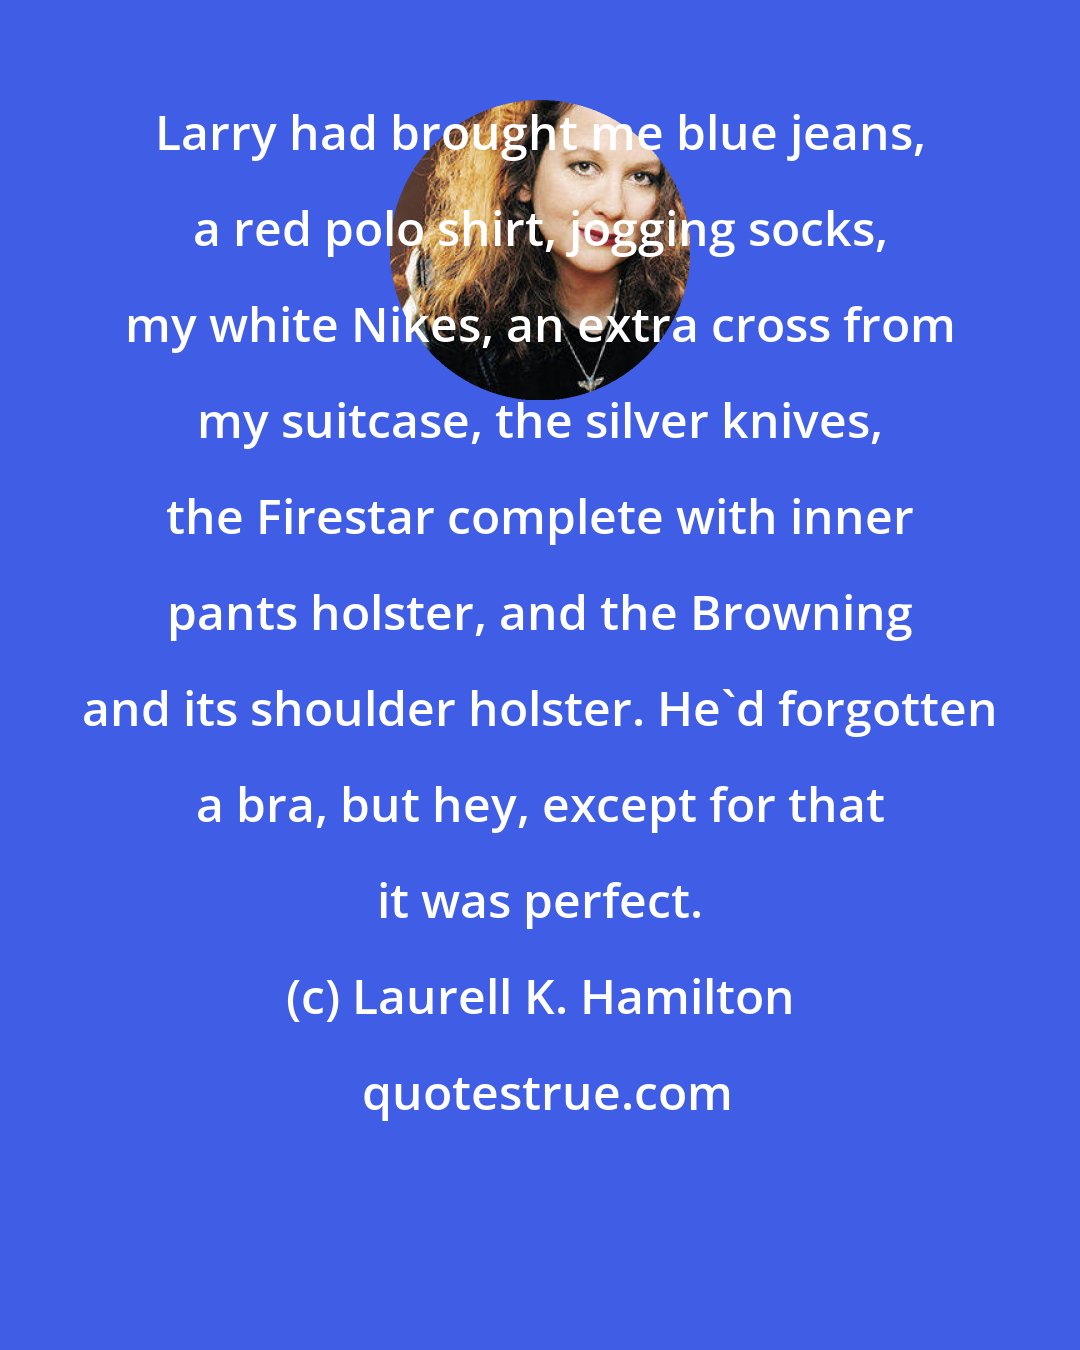 Laurell K. Hamilton: Larry had brought me blue jeans, a red polo shirt, jogging socks, my white Nikes, an extra cross from my suitcase, the silver knives, the Firestar complete with inner pants holster, and the Browning and its shoulder holster. He'd forgotten a bra, but hey, except for that it was perfect.